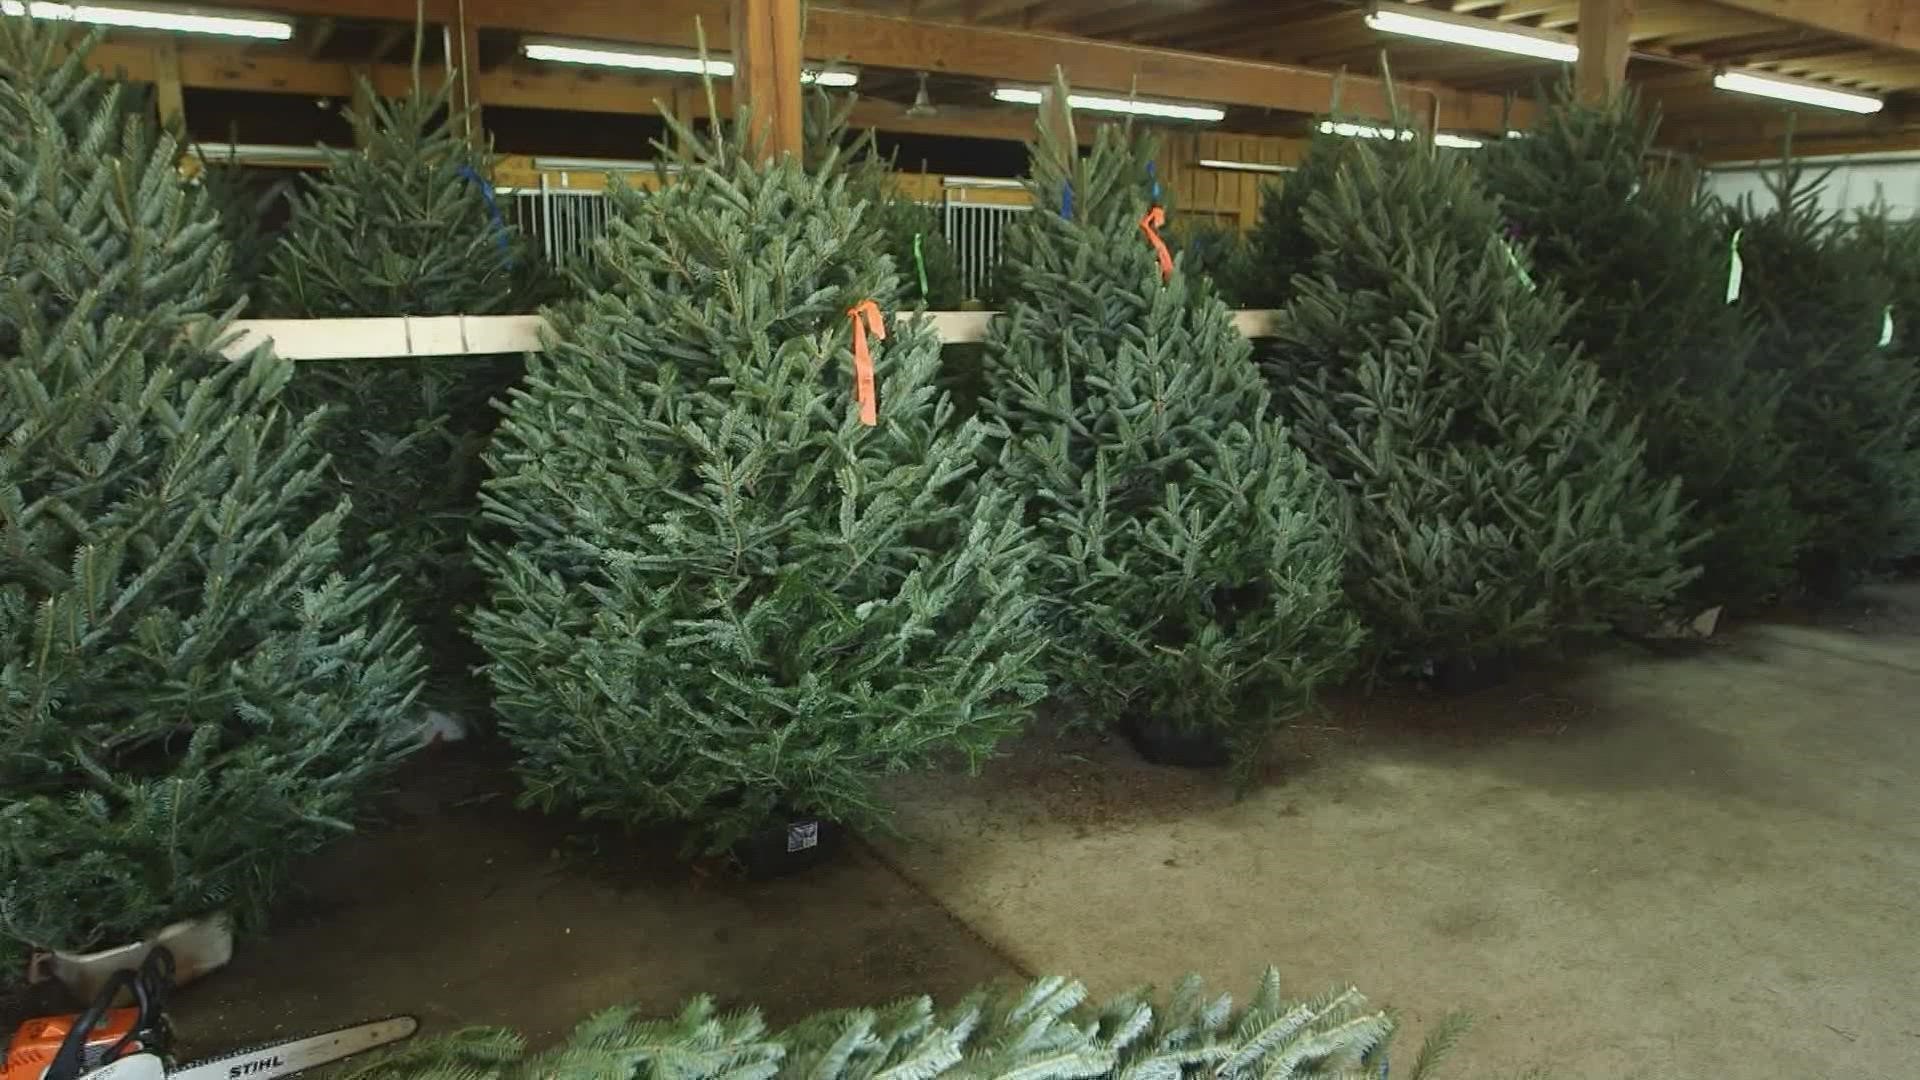 A survey of 55 wholesale Christmas tree growers found 71% expect to raise wholesale prices.